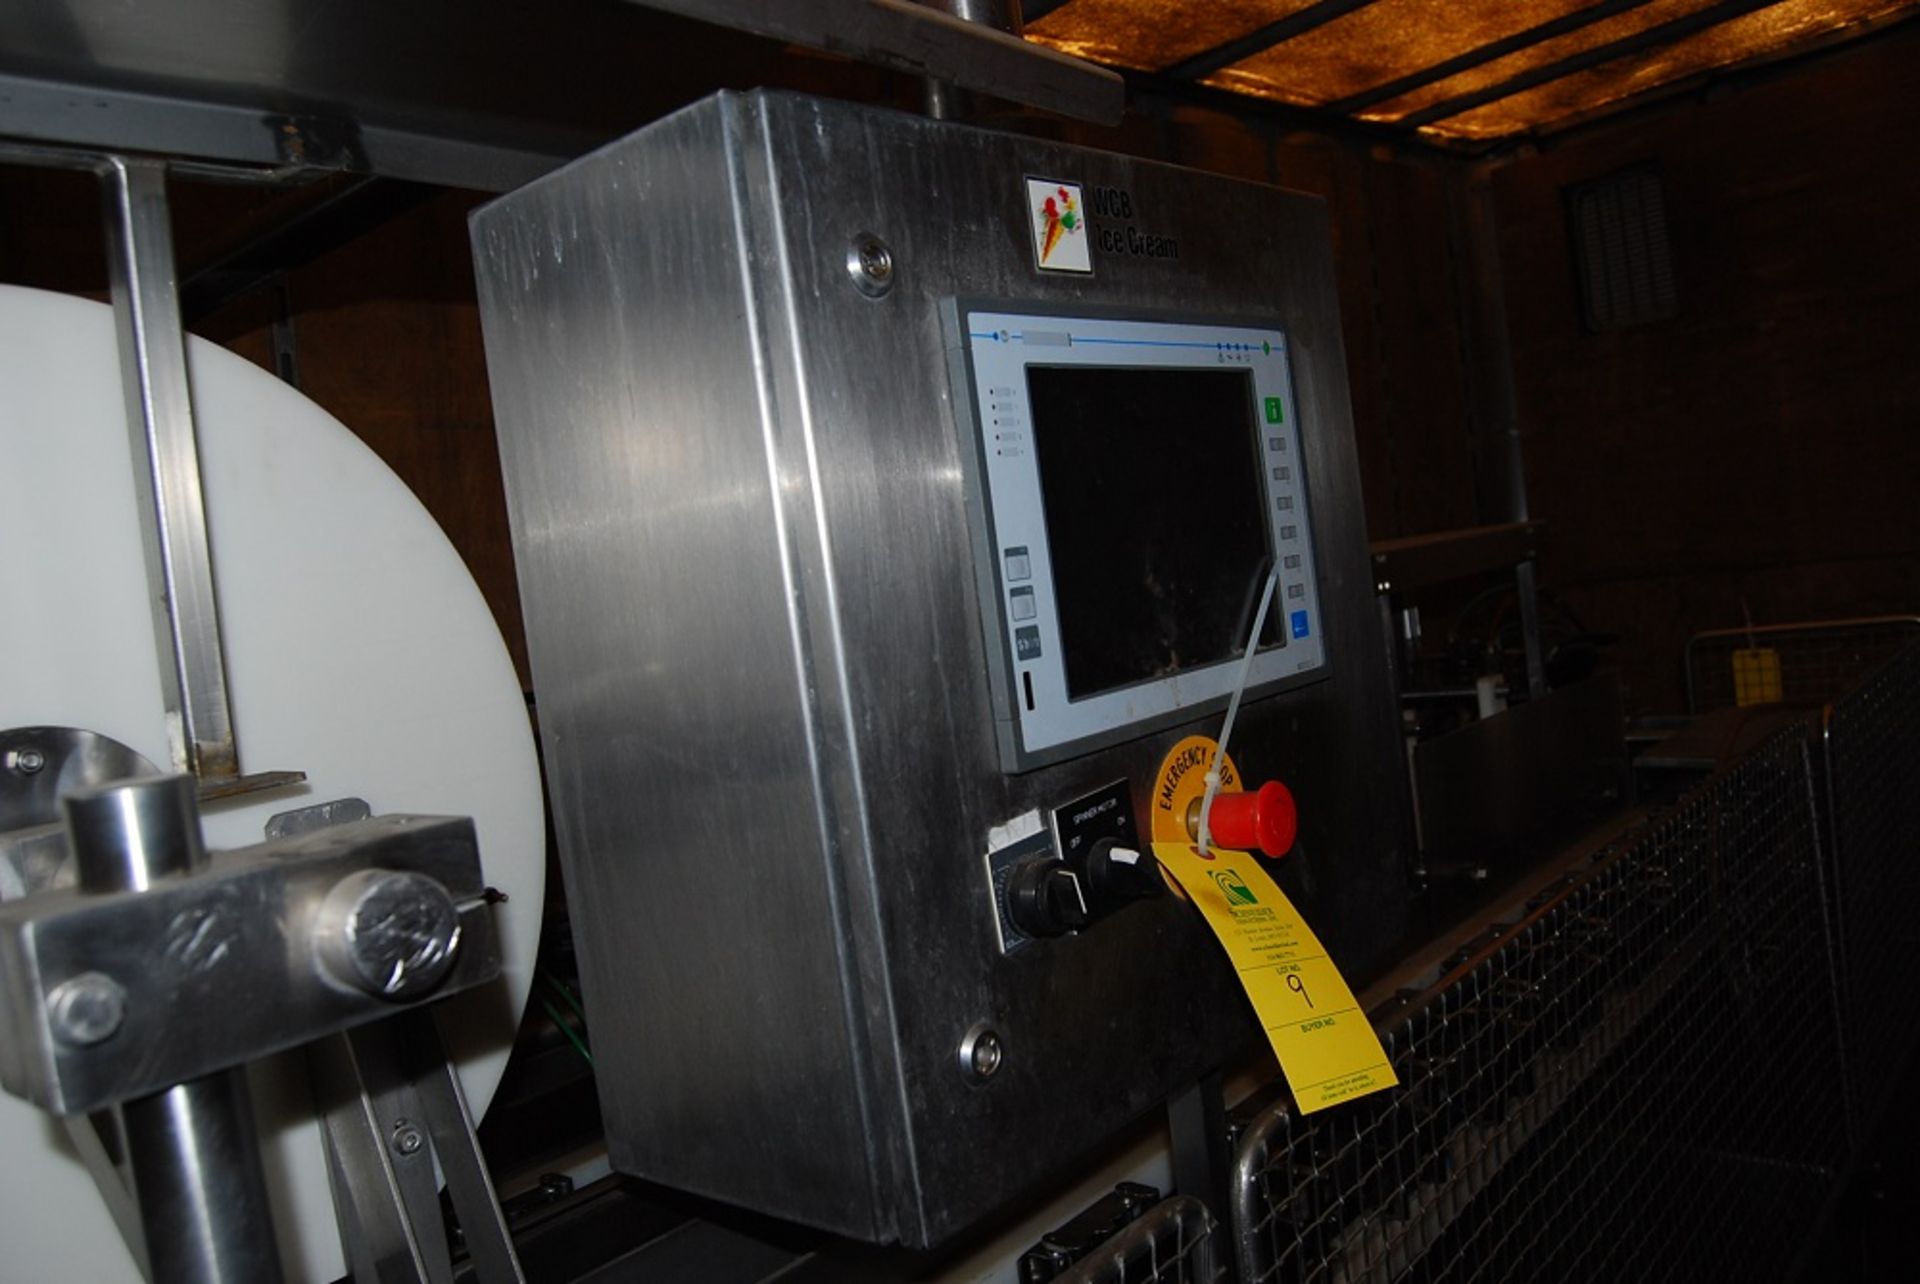 WCB Ice Cream Machine, Type: Cart-O-Fill, No. 406529-04, Year 2001, Set up for Square pints Foot pr - Image 4 of 18